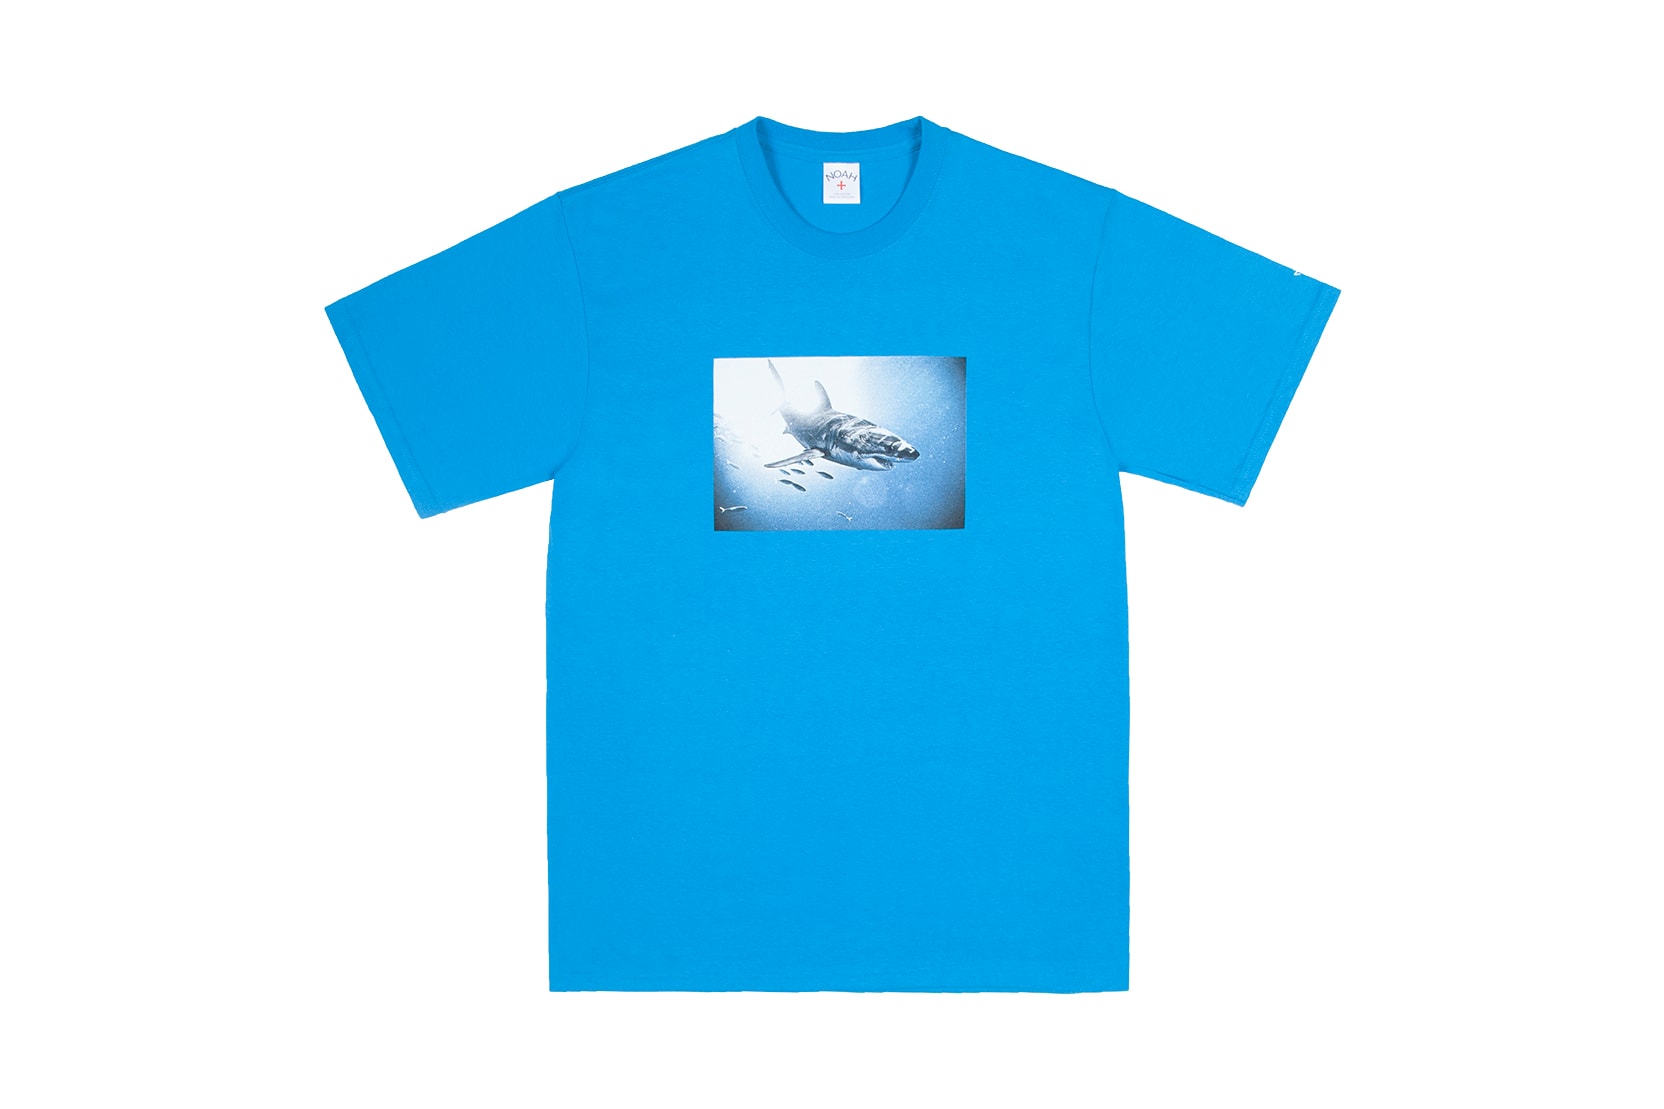 Noah x Michael Muller Collection Available Purchase Buy Dover Street Market London Instore Online Photo Exhibition May 17 Photo Book Limited Edition Tees T-Shirts Shark